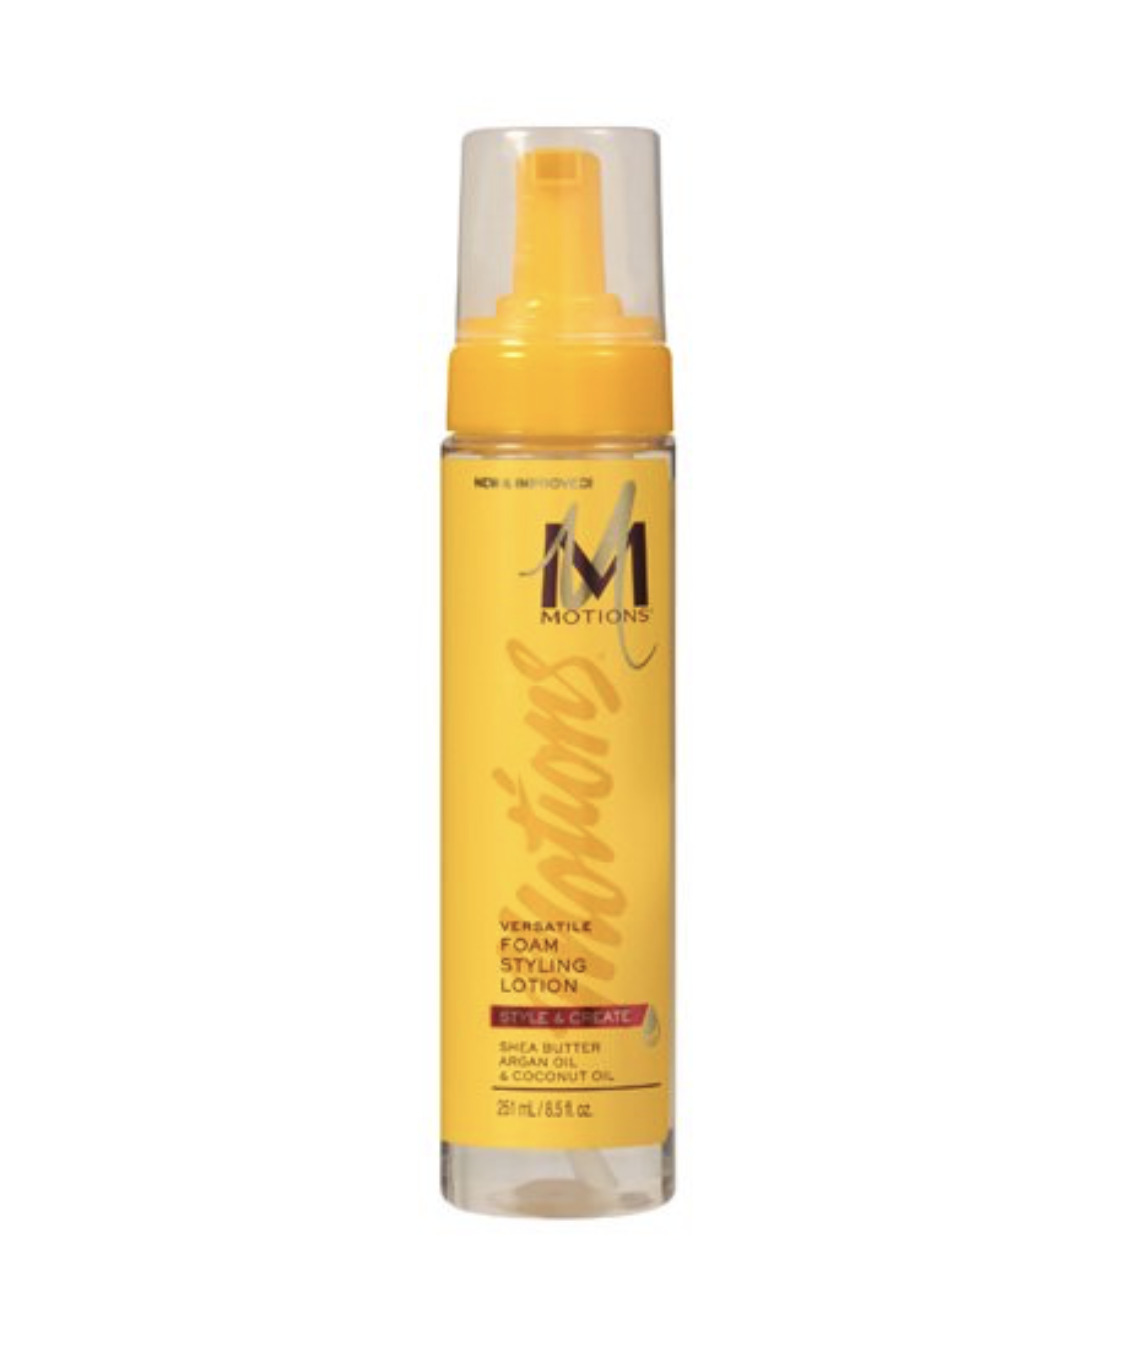 Motions Versatile Foam Styling Lotion/Mousse with 3 essential oils 8.5 Oz